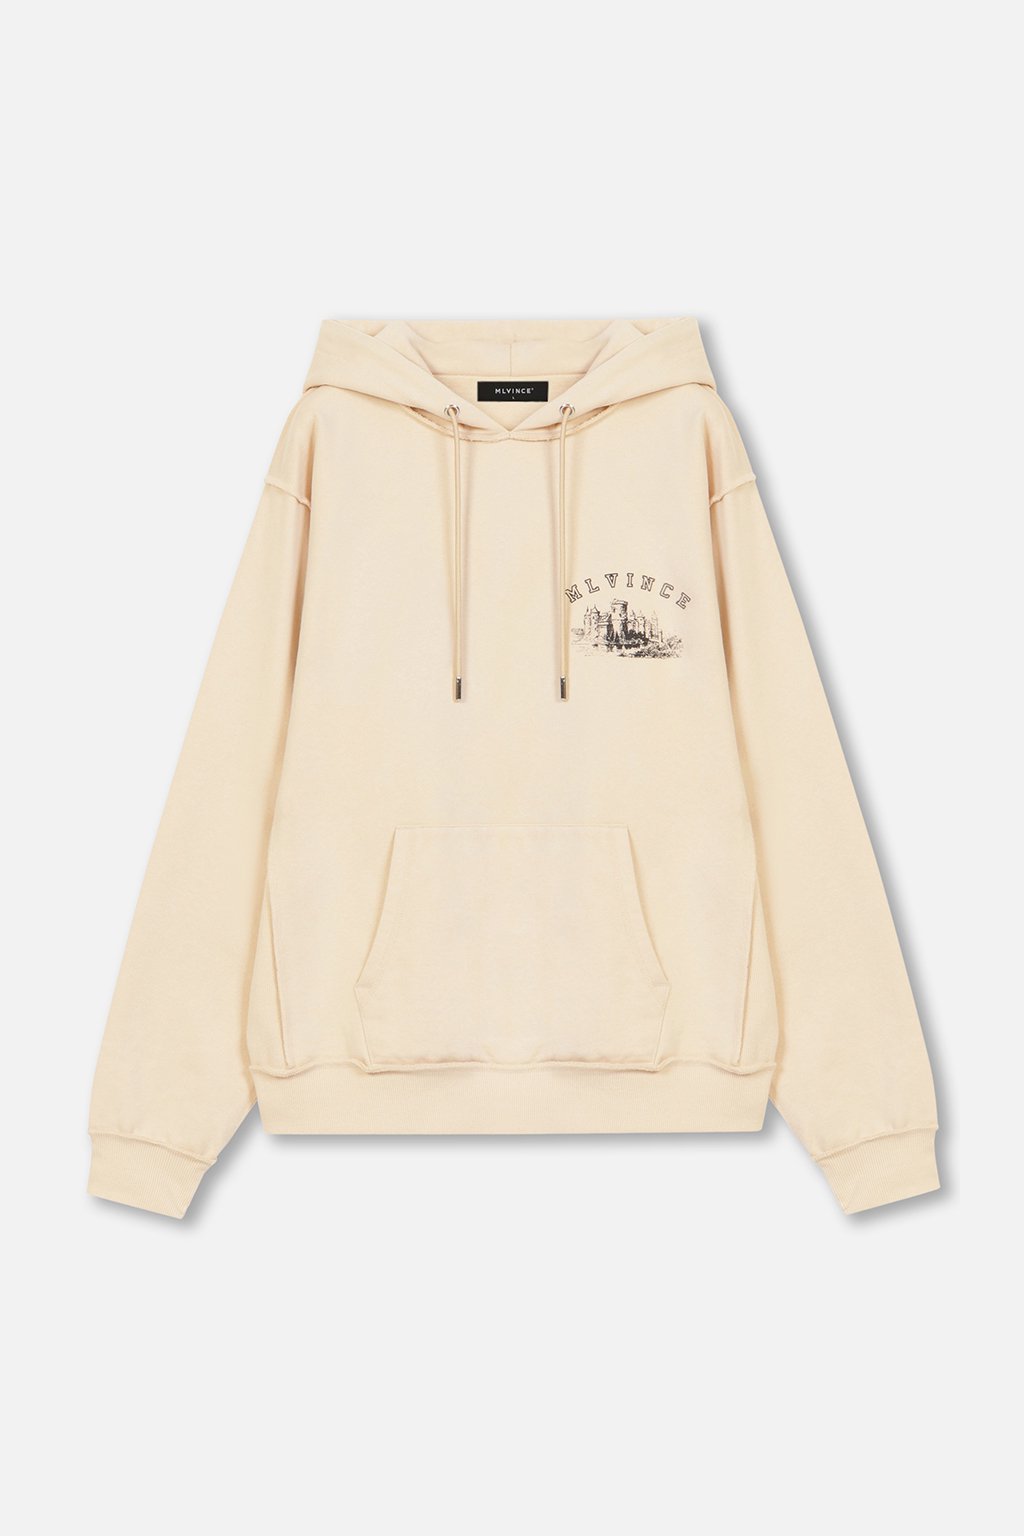 70%OFF MLVINCE (メルヴィンス) | ARCHITECTURE HOODY NATURAL